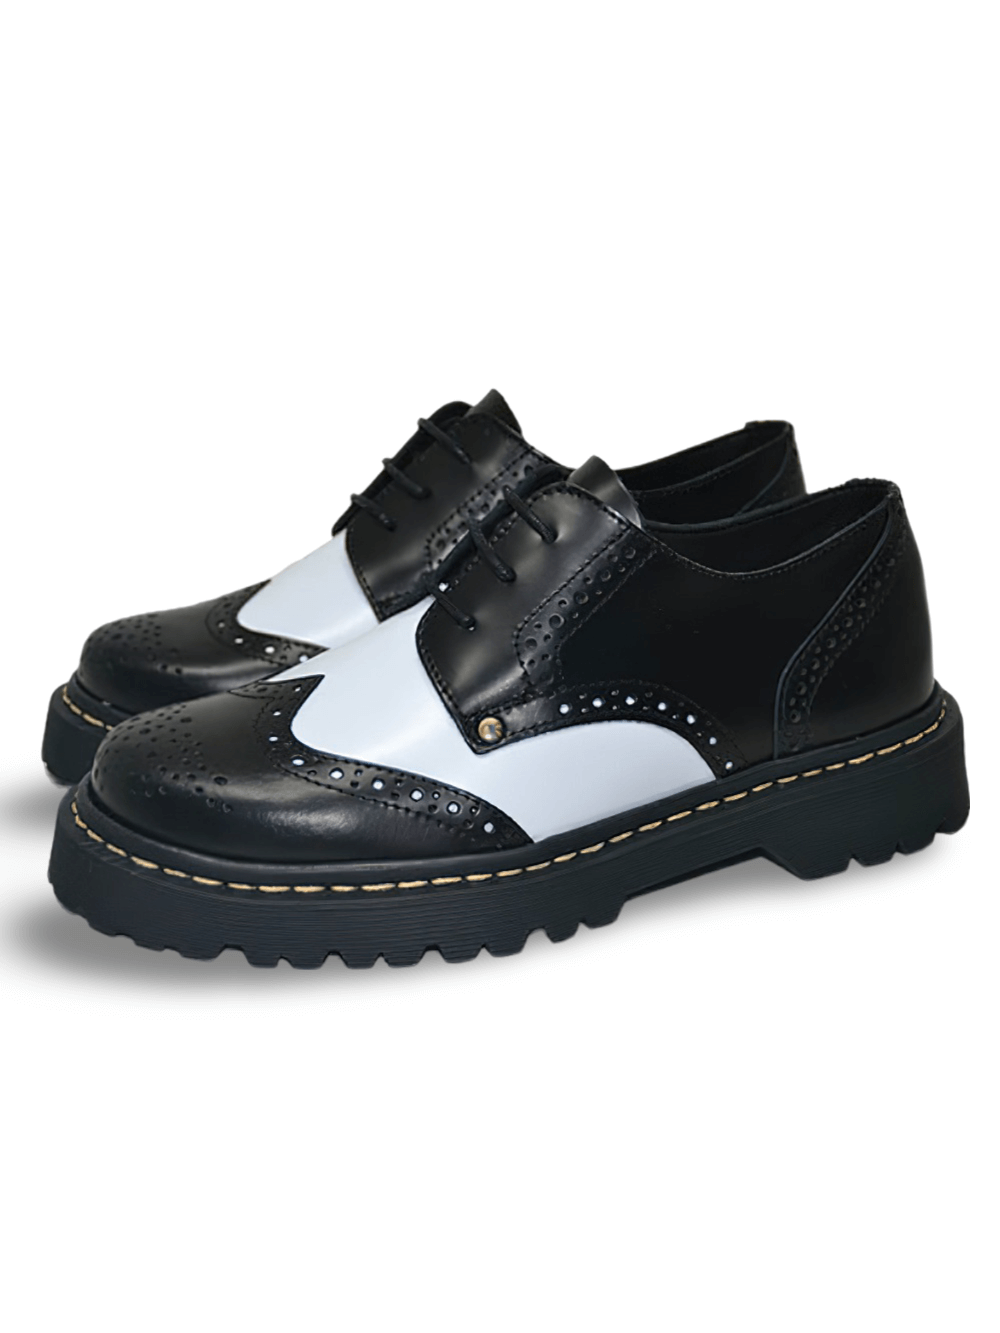 Elegant Black and White Leather Shoes with TR Sole